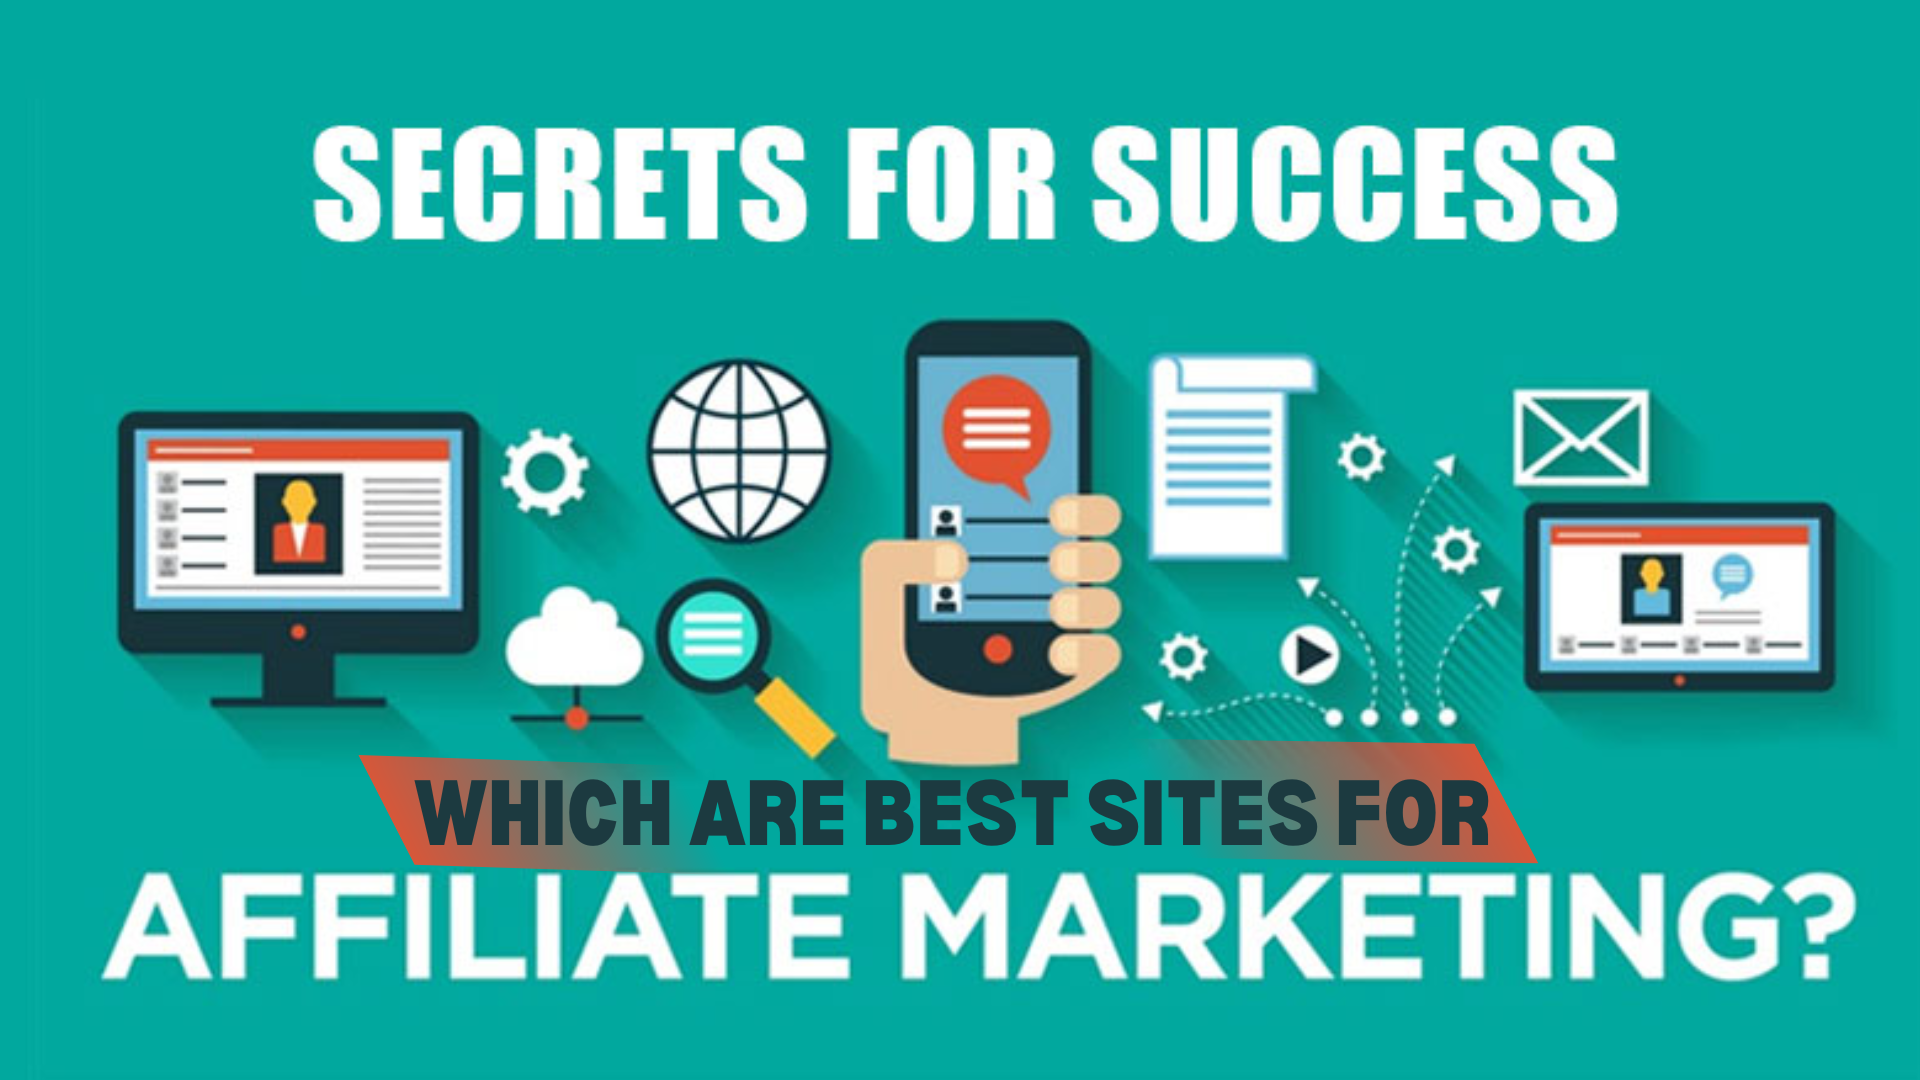 Best Sites for Affiliate Marketing